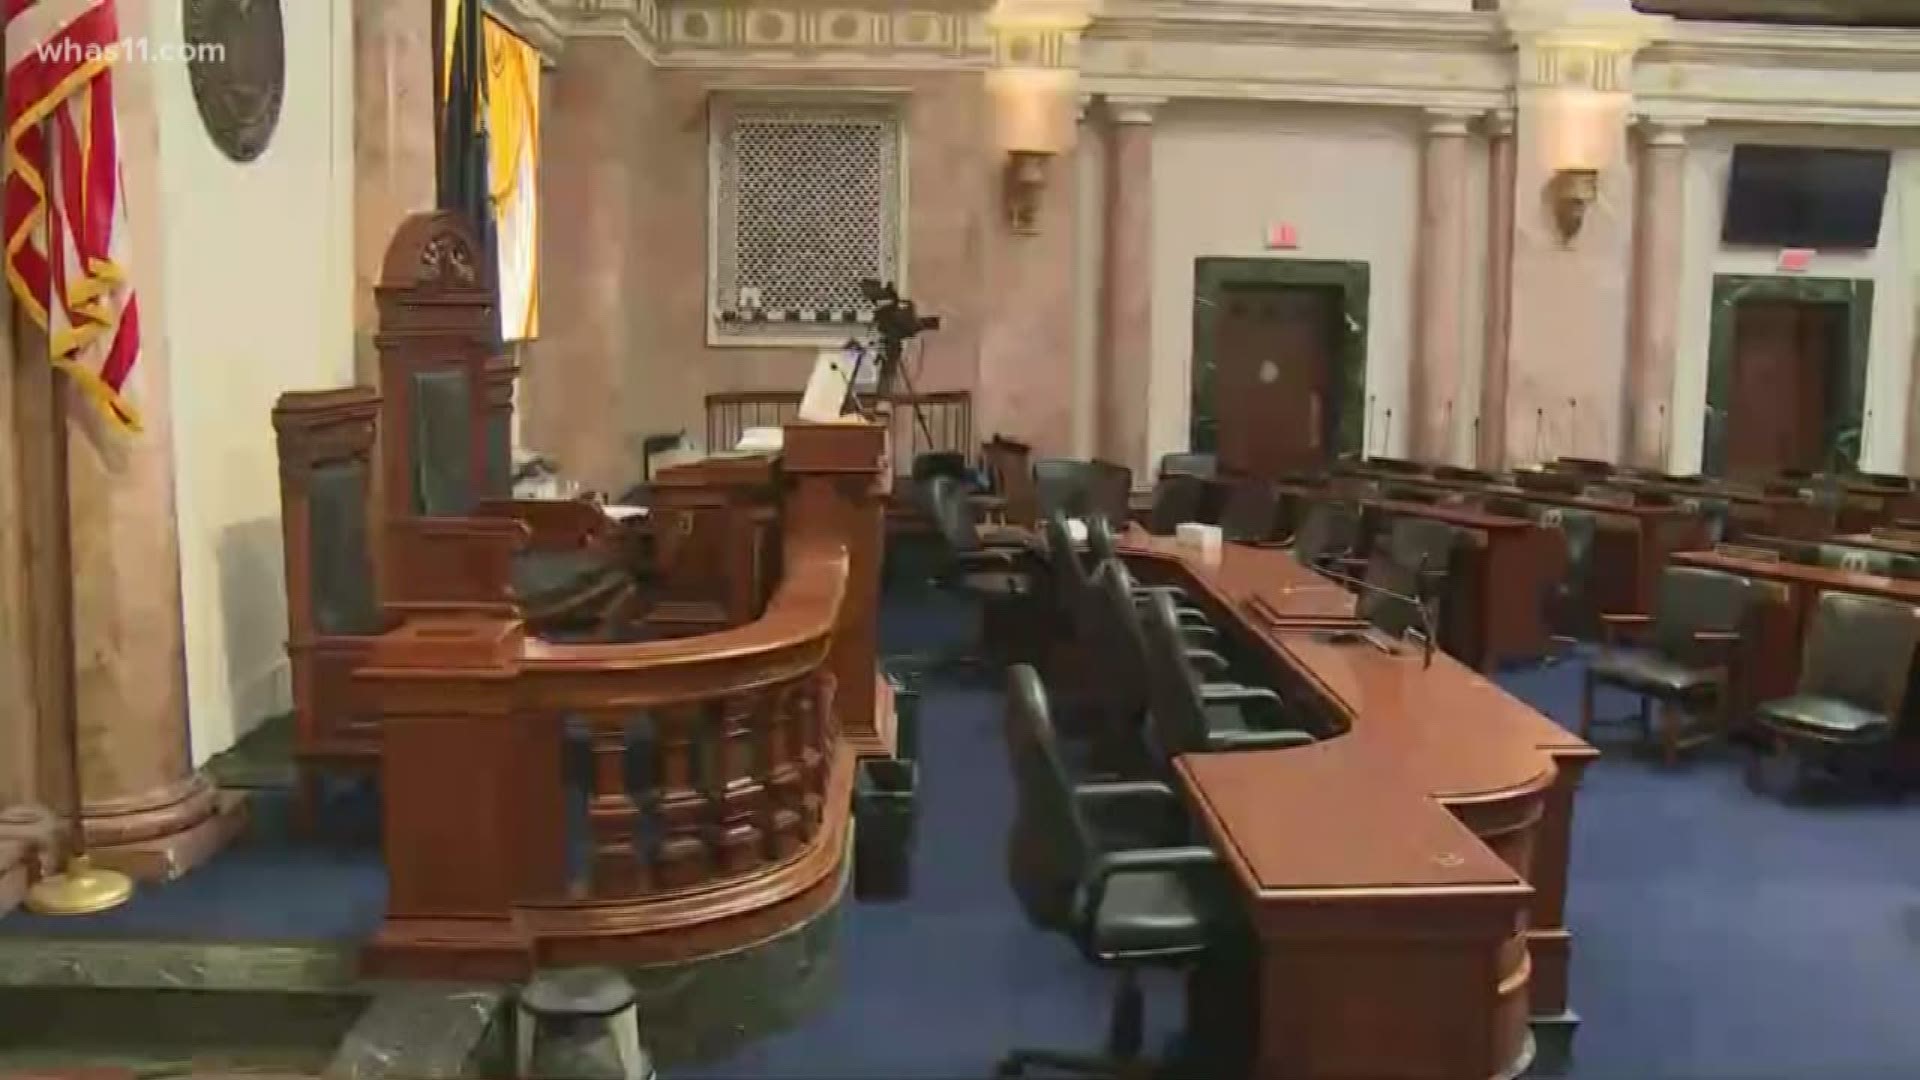 Kentucky lawmakers are preparing for the 2019 session and school safety legislation will be considered priority.